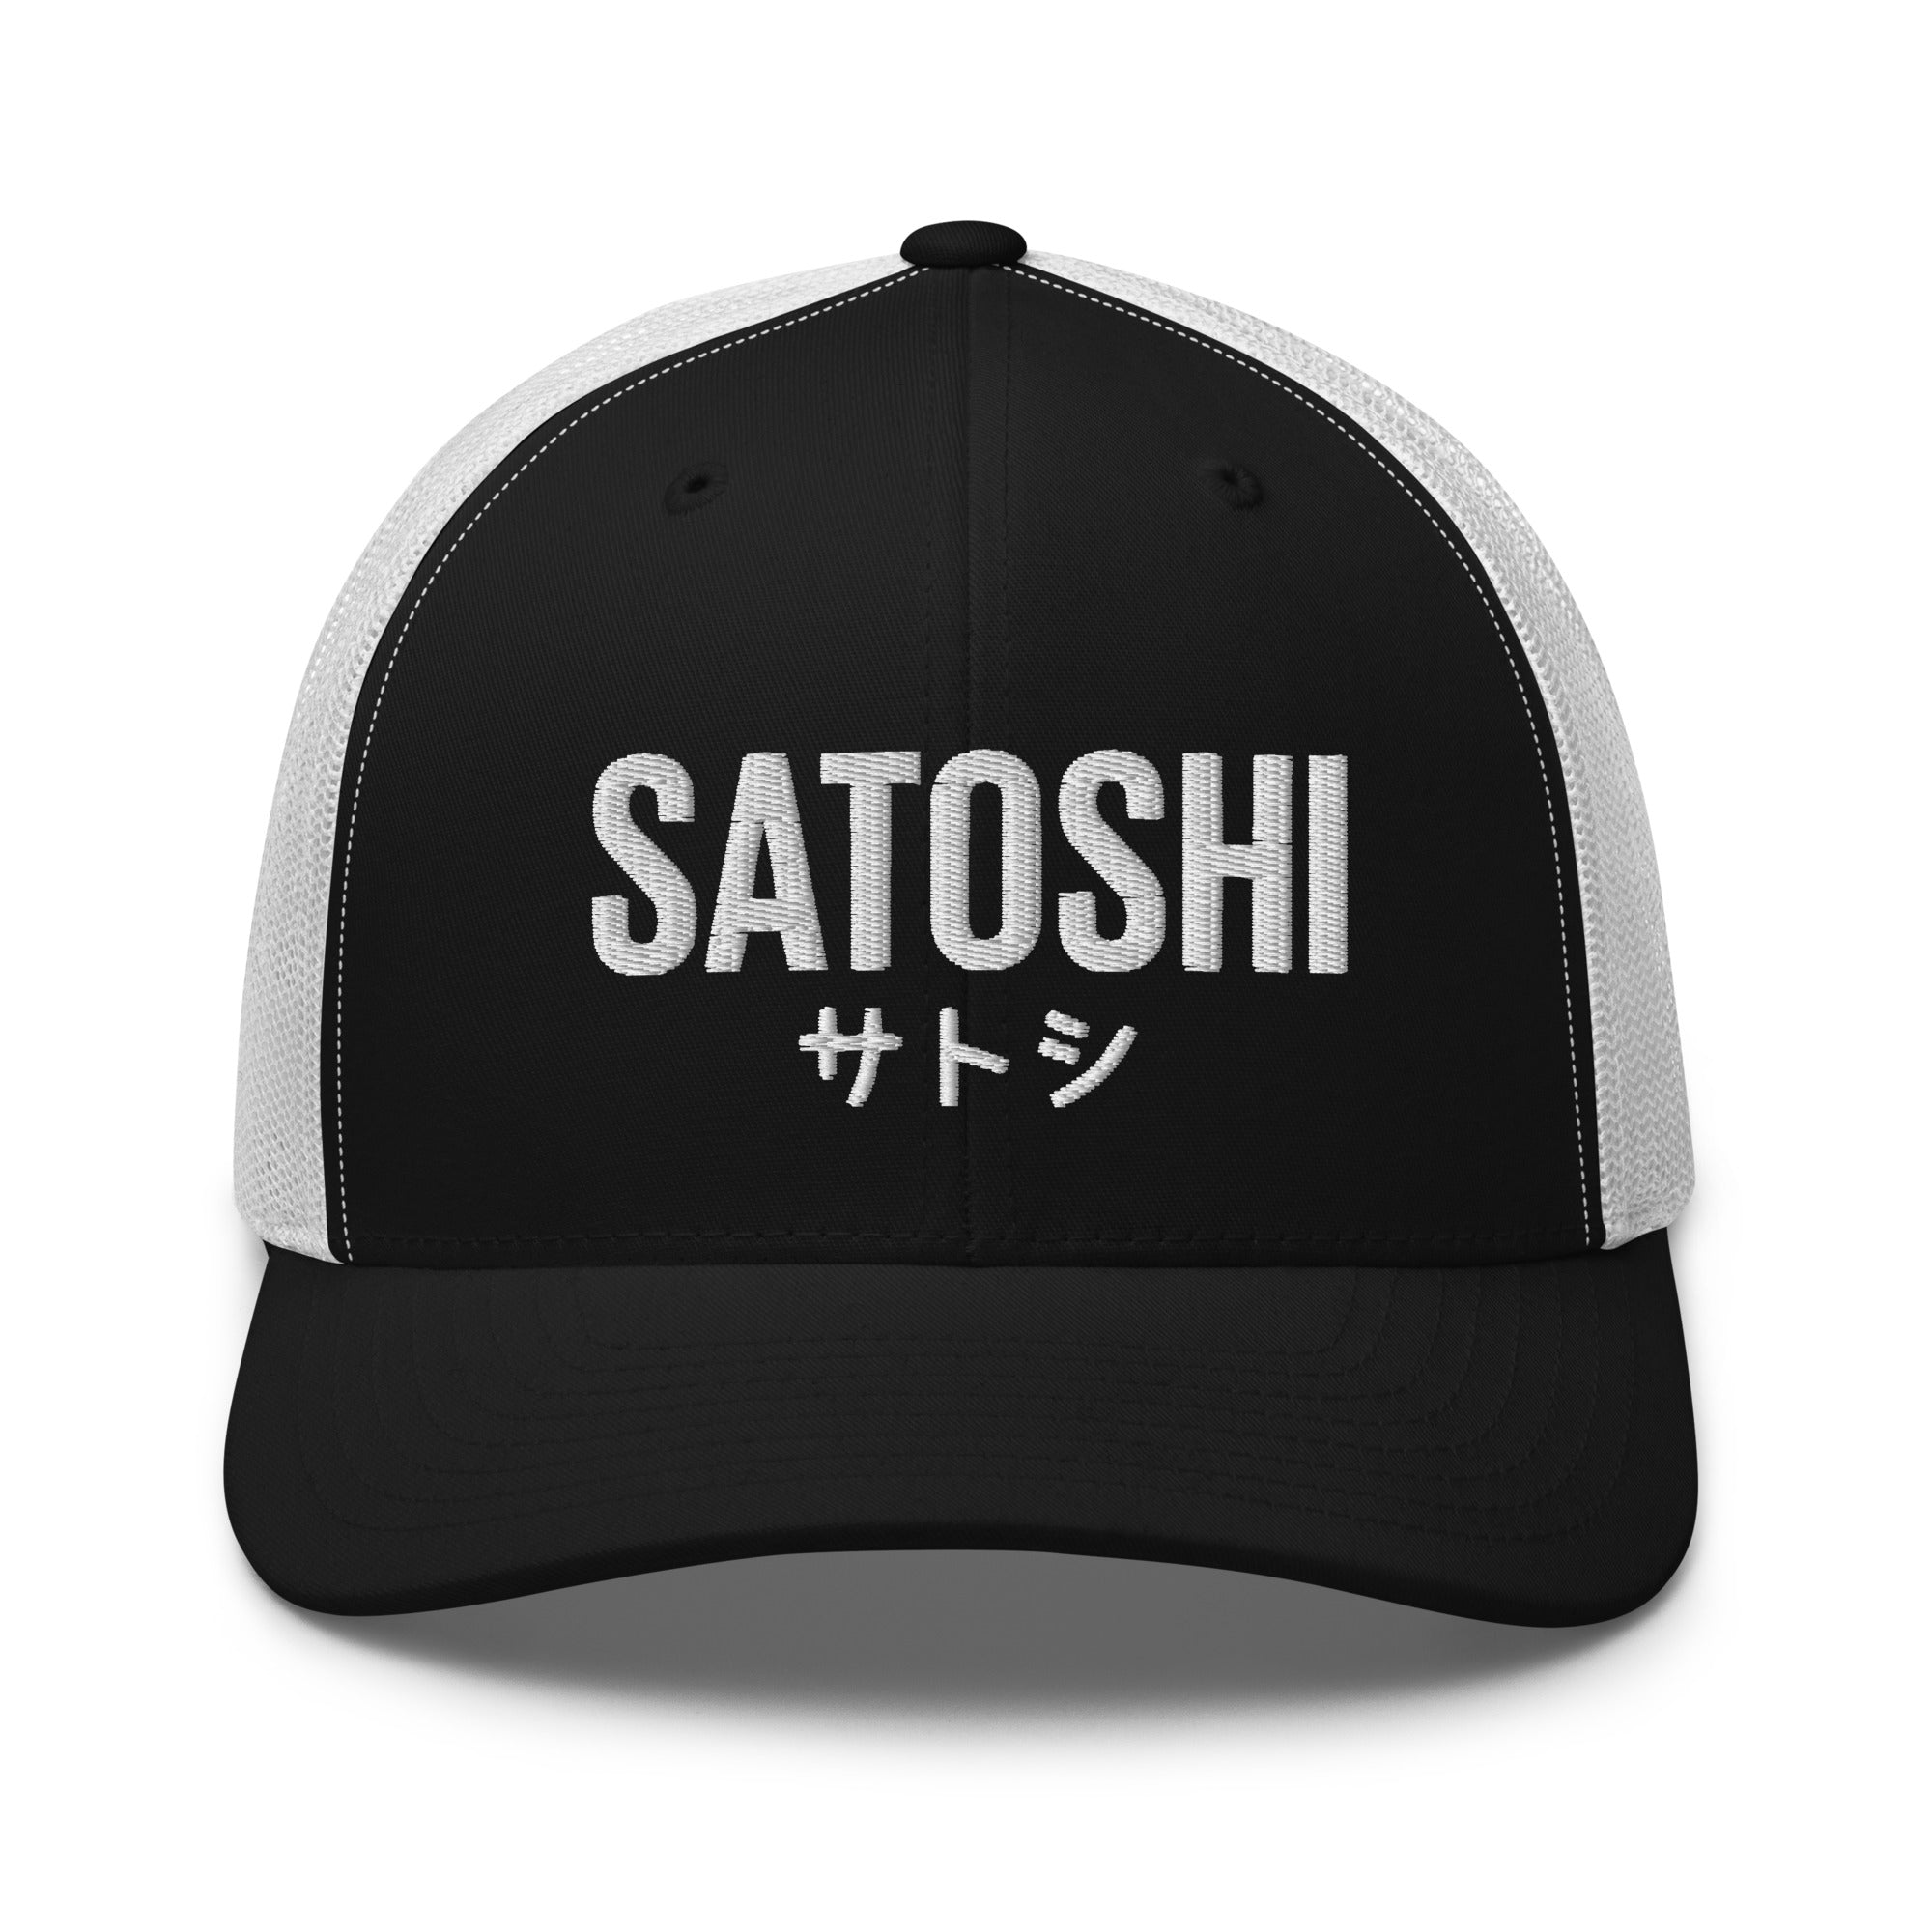 Bitcoin Merchandise - The Satoshi Hat features a bilingual embroidered design on the front. Color: Black and White. Front view.